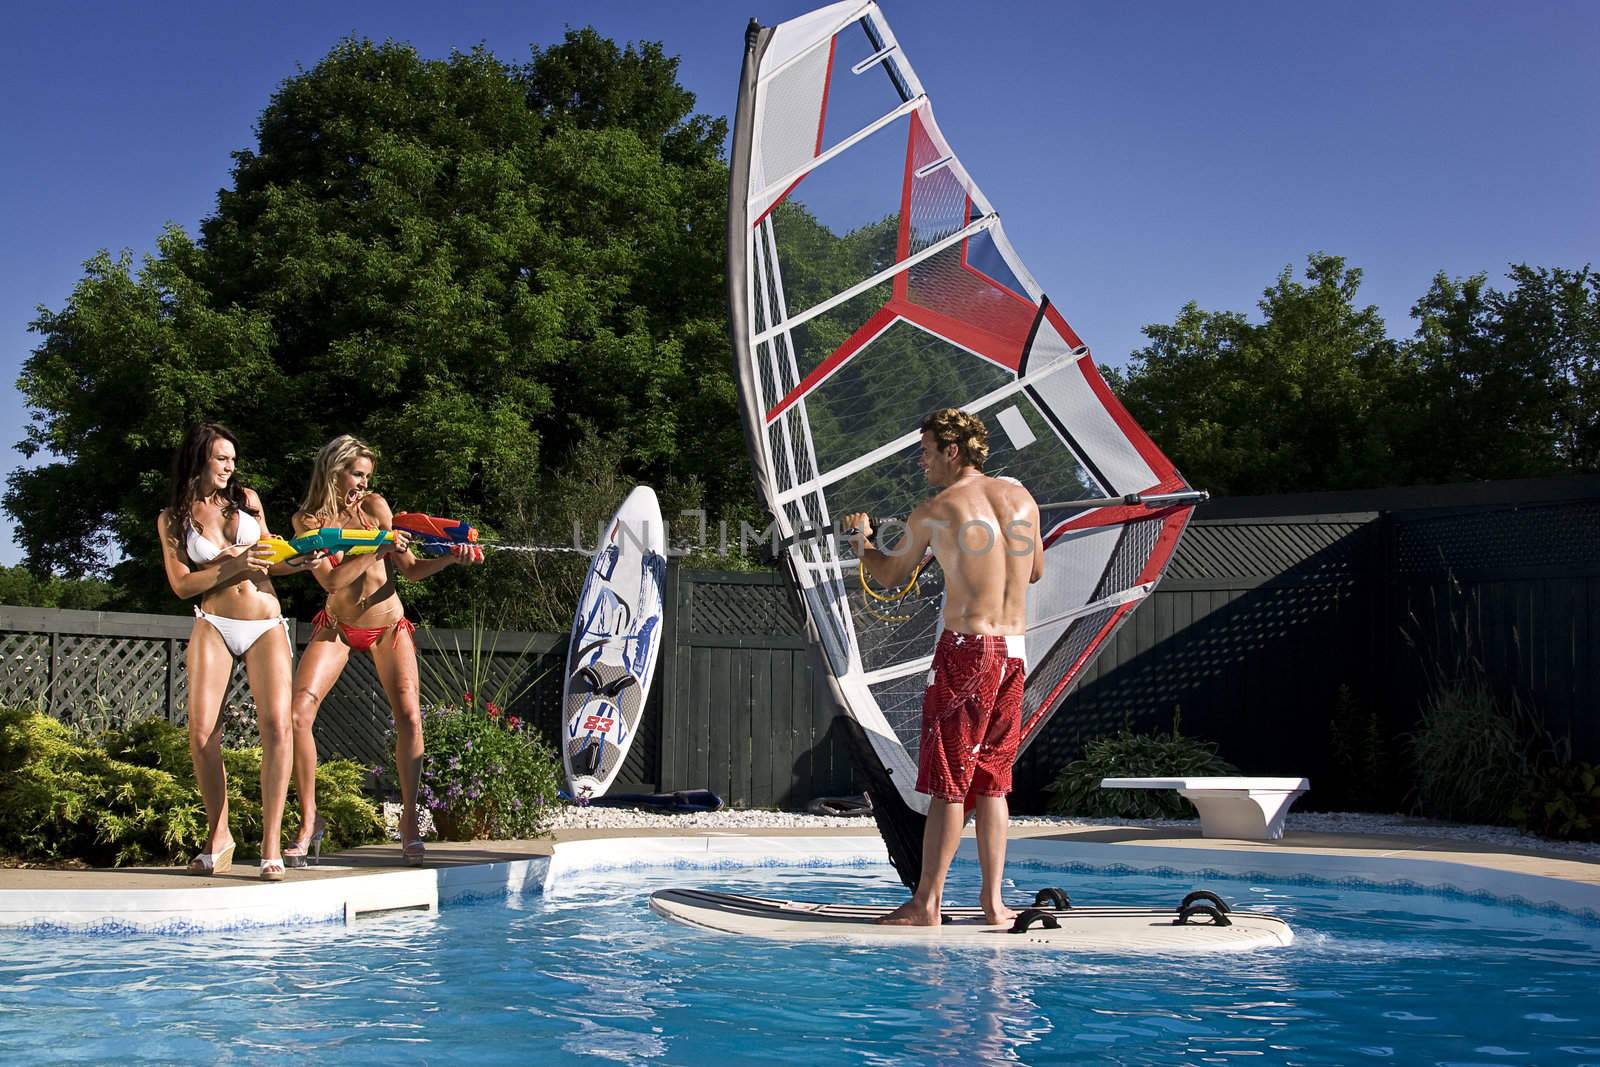 two girl spray a windsufer, in a pool, with water gun